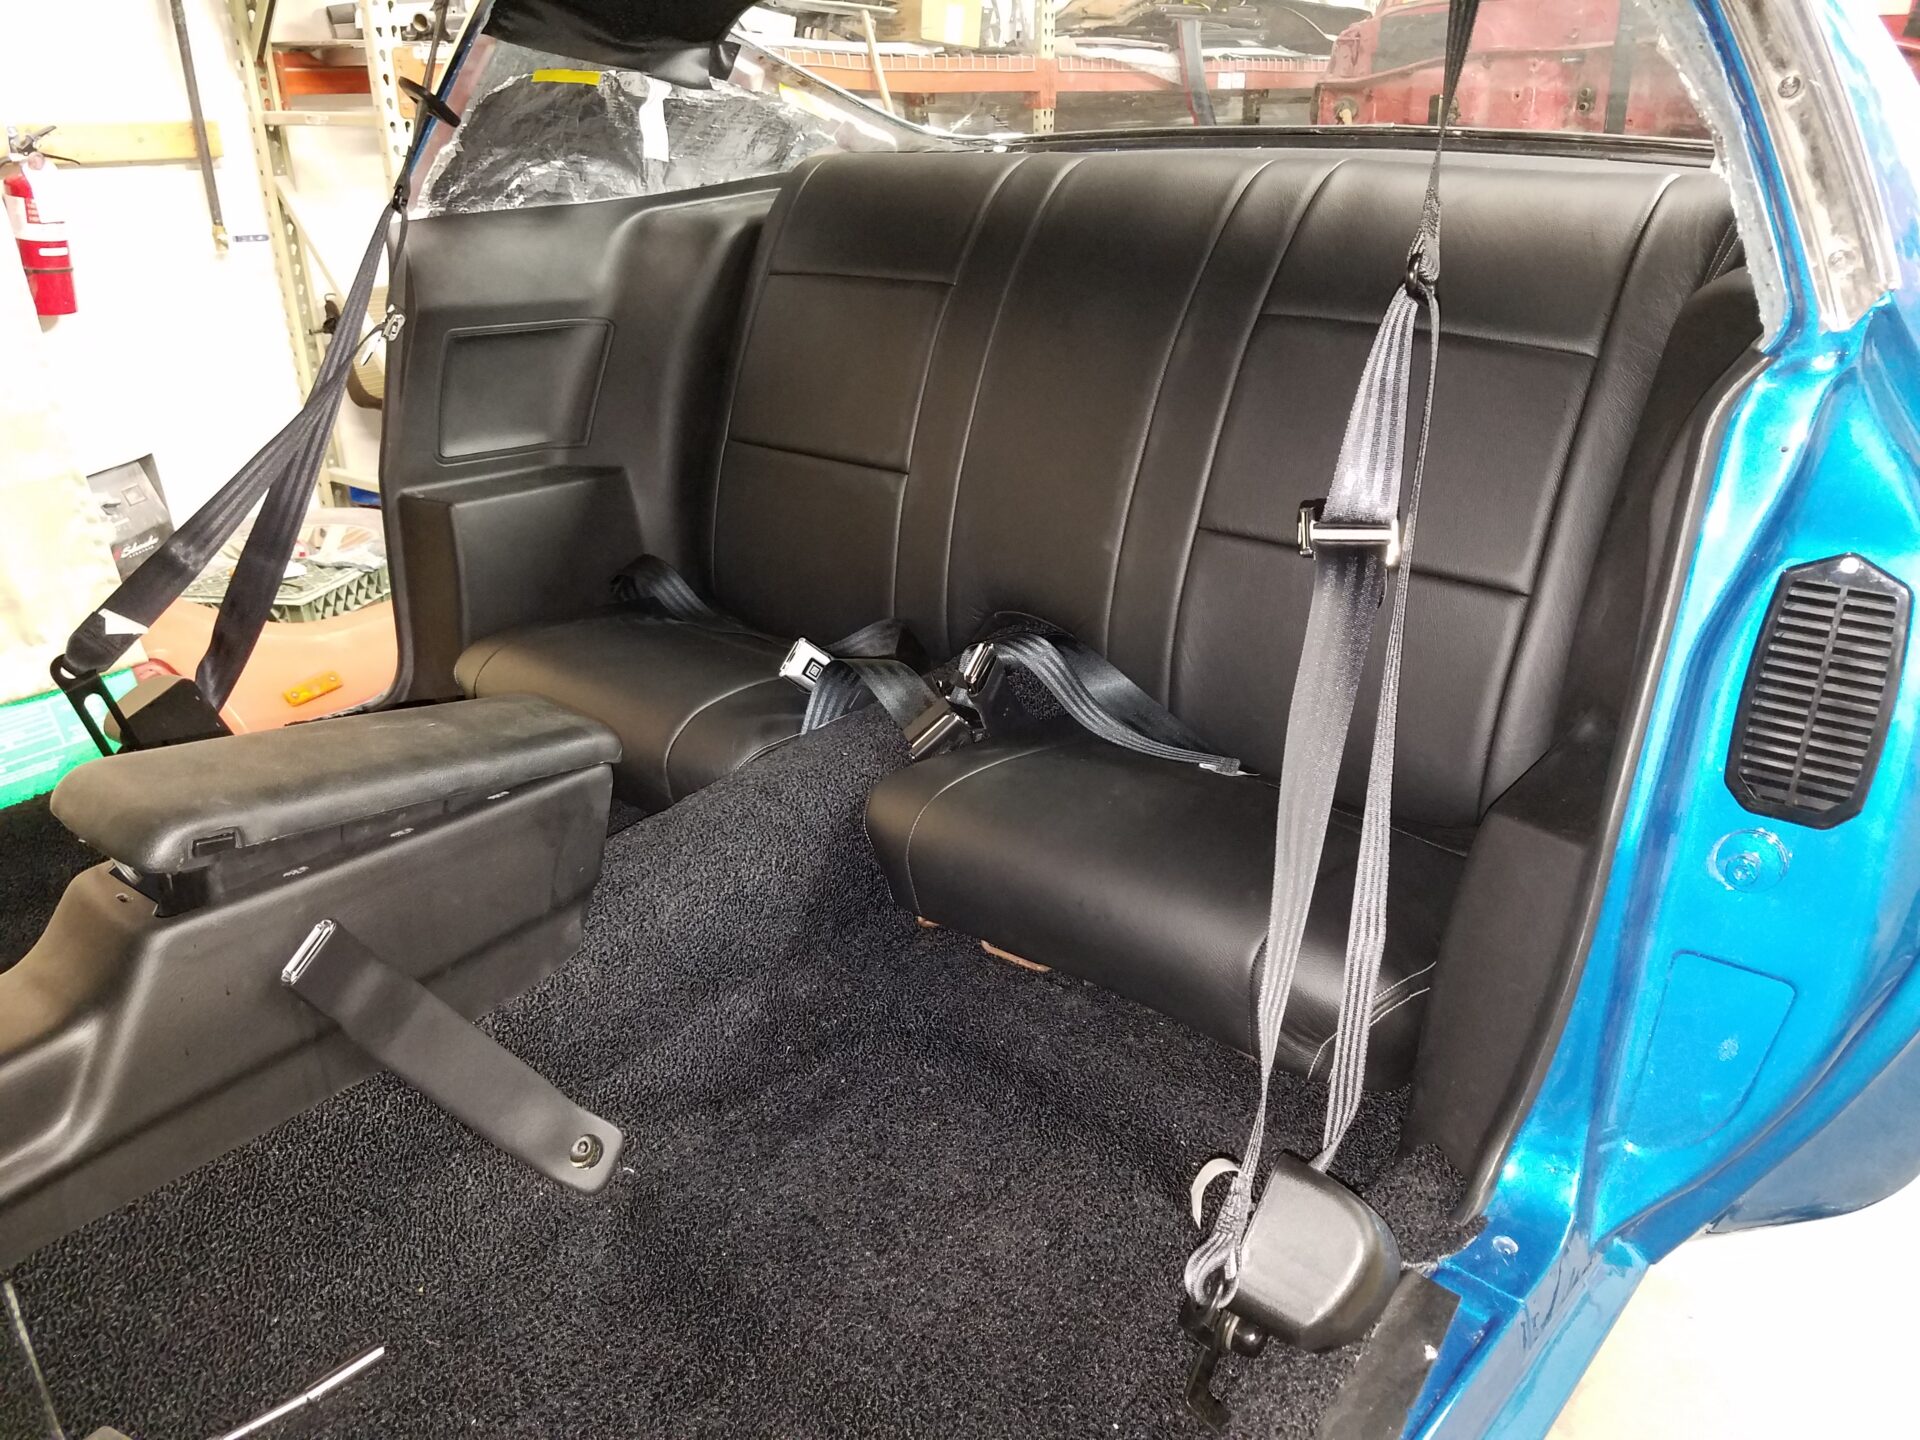 Seats reinstalled to the 1971 Pontiac Trans Am